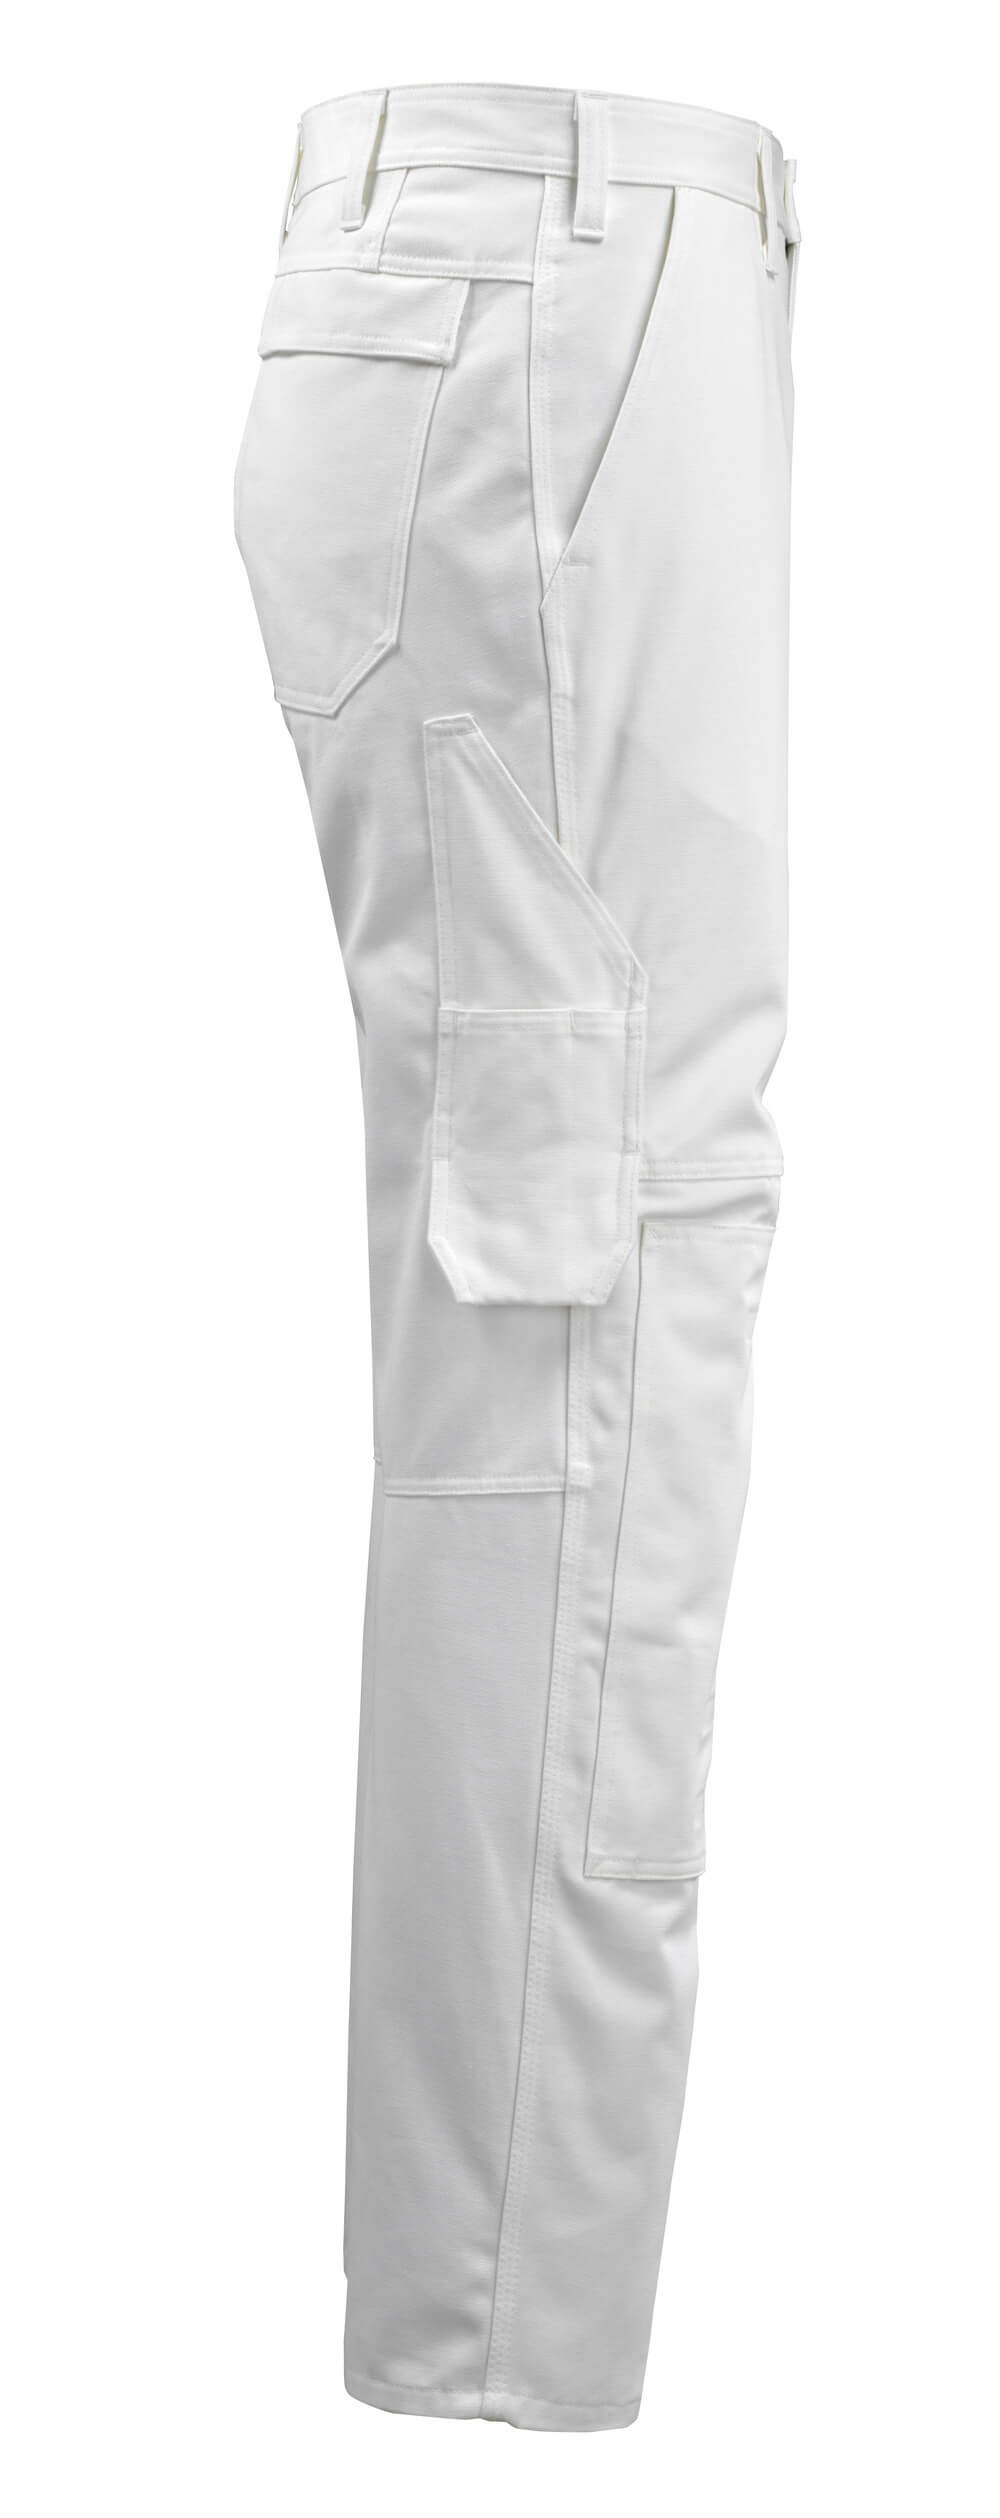 MACMICHAEL WORKWEAR Trousers with kneepad pockets 14579